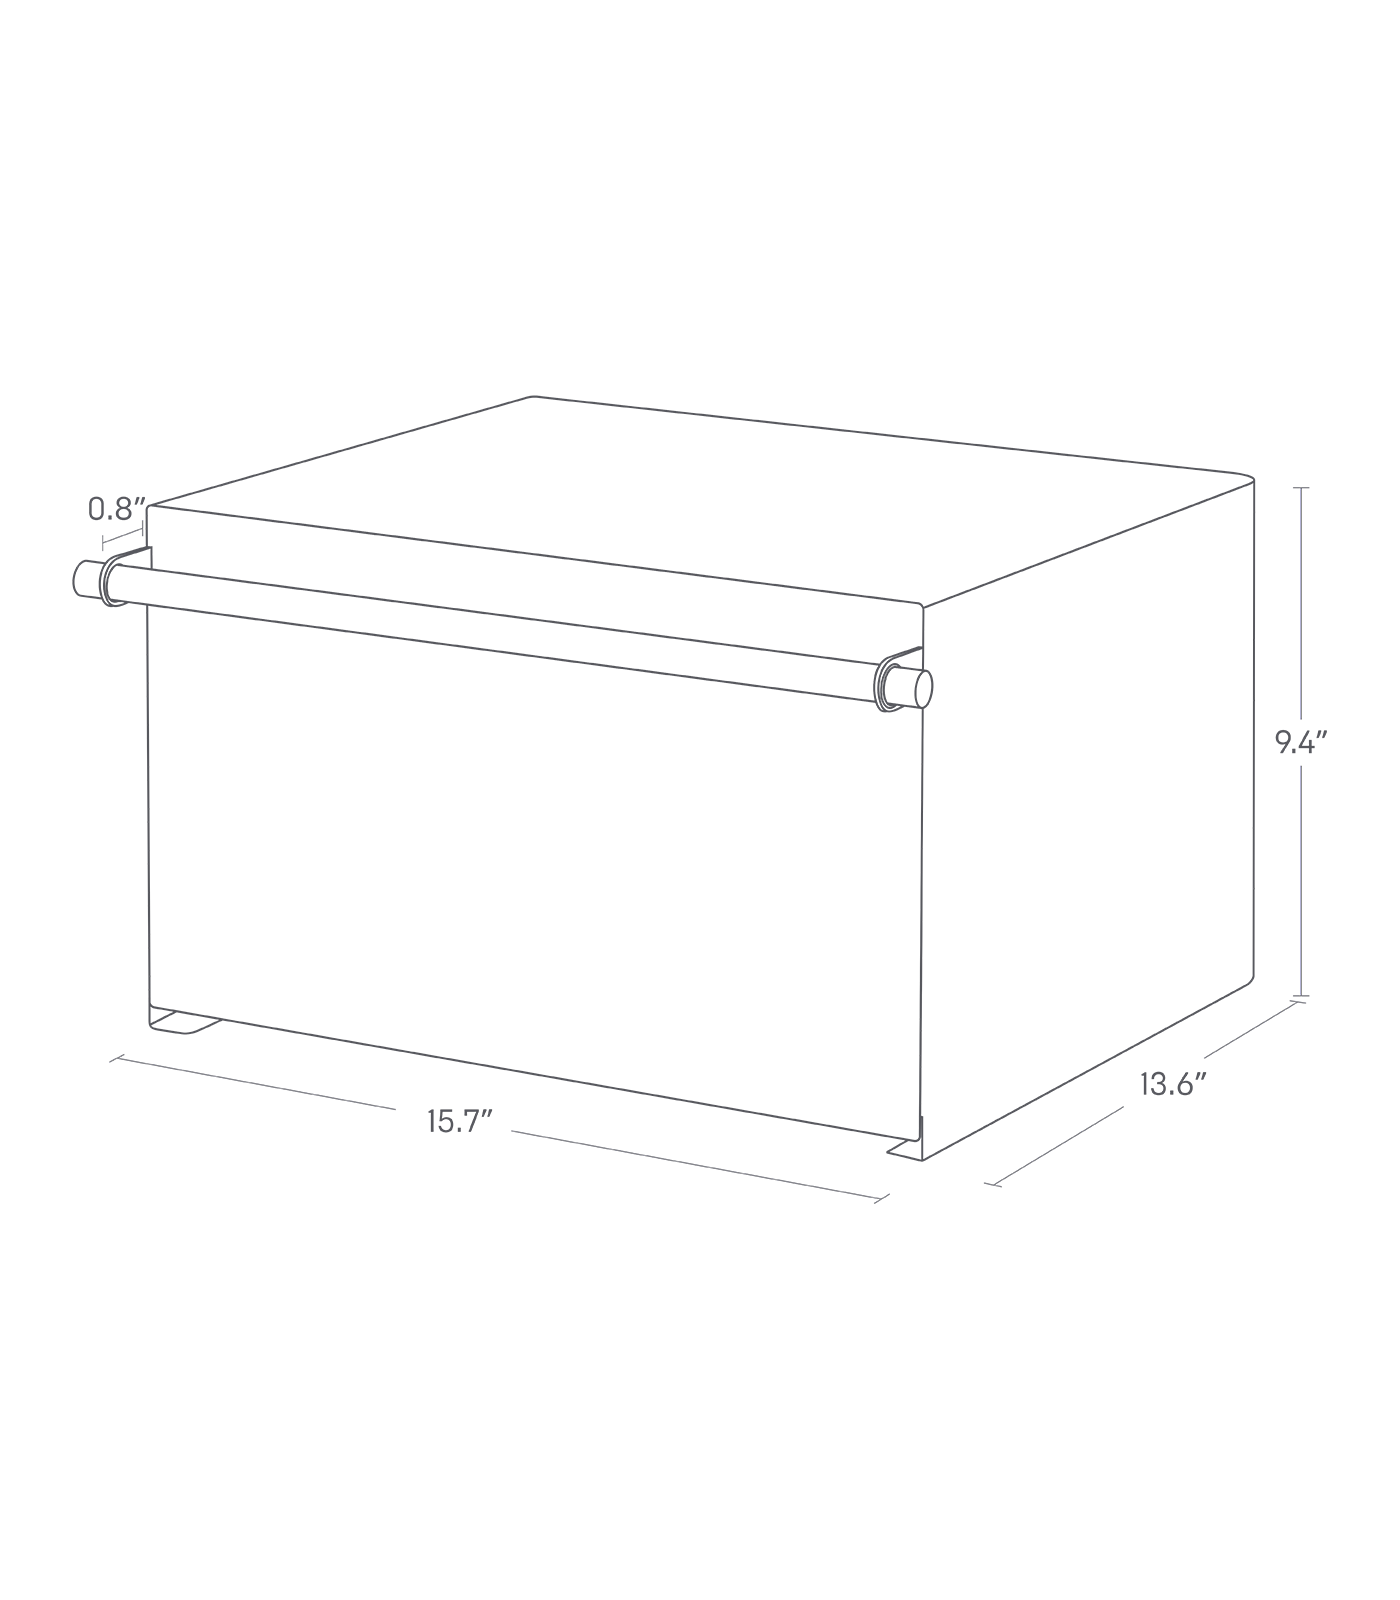 Dimension image for Bread Box - Two Styles on a white background including dimensions  L 14.37 x W 16.93 x H 9.45 inches